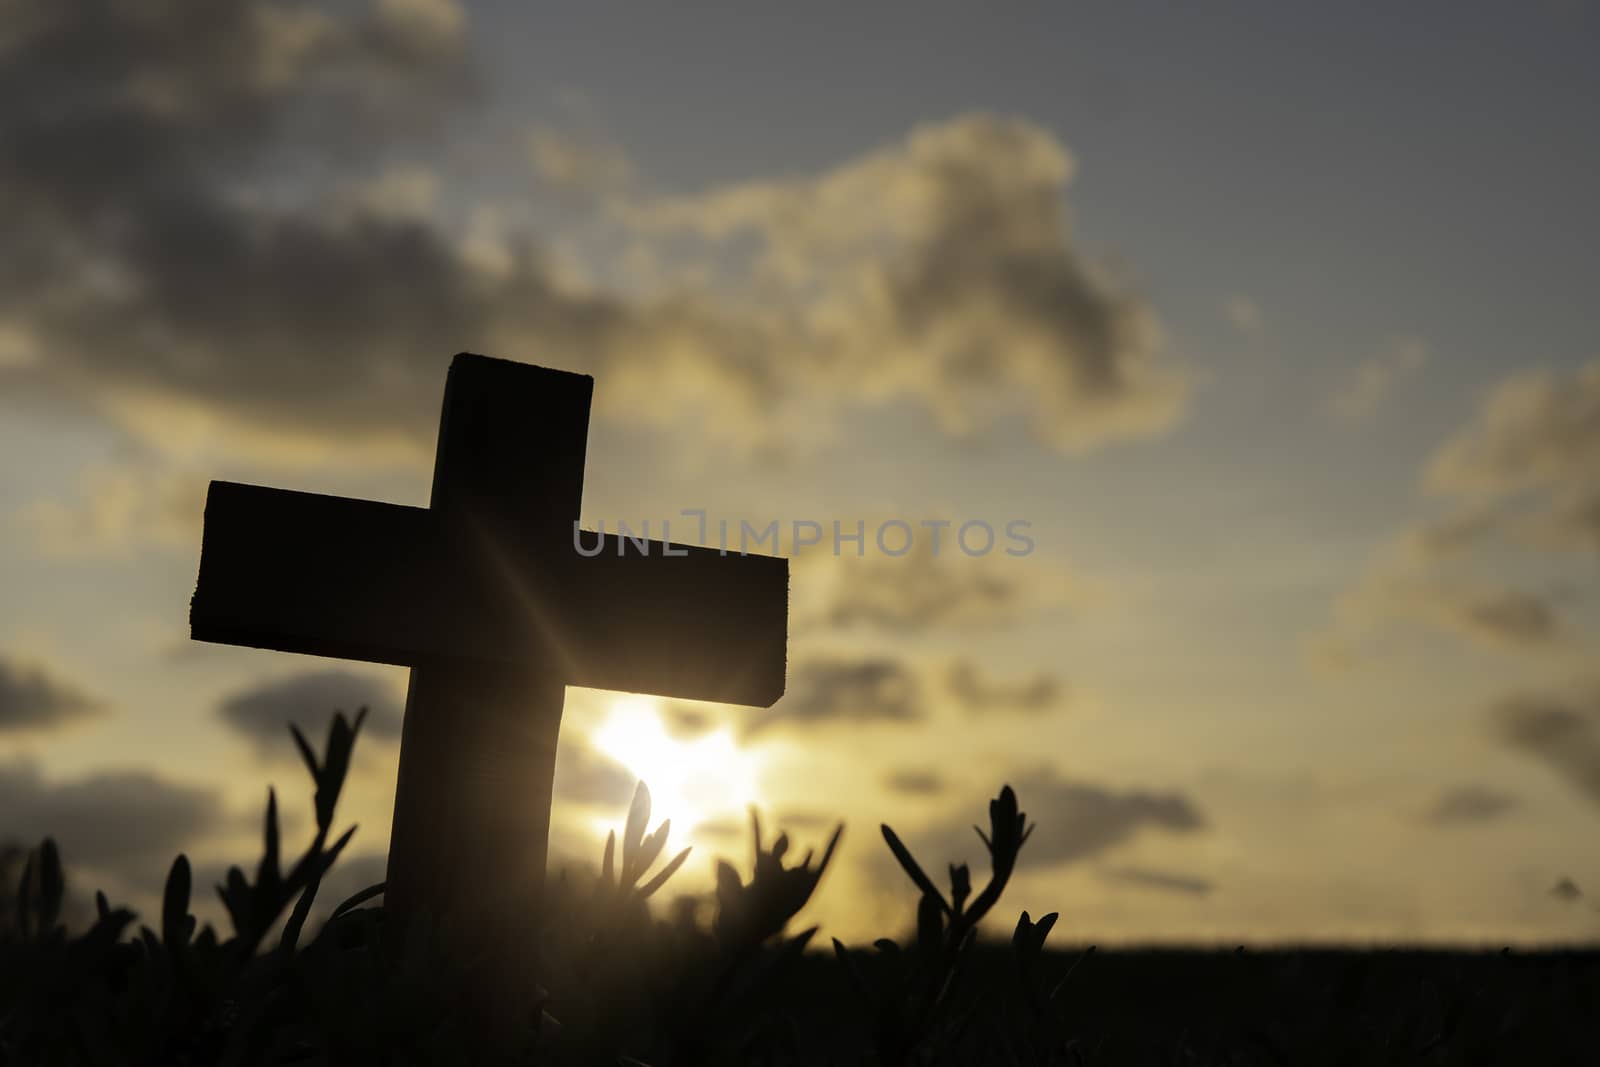 Silhouette Jesus christ death on cross crucifixion on calvary hill in sunset good friday risen in easter day concept for Christian praise for holy spirit religious God, Catholic praying background.